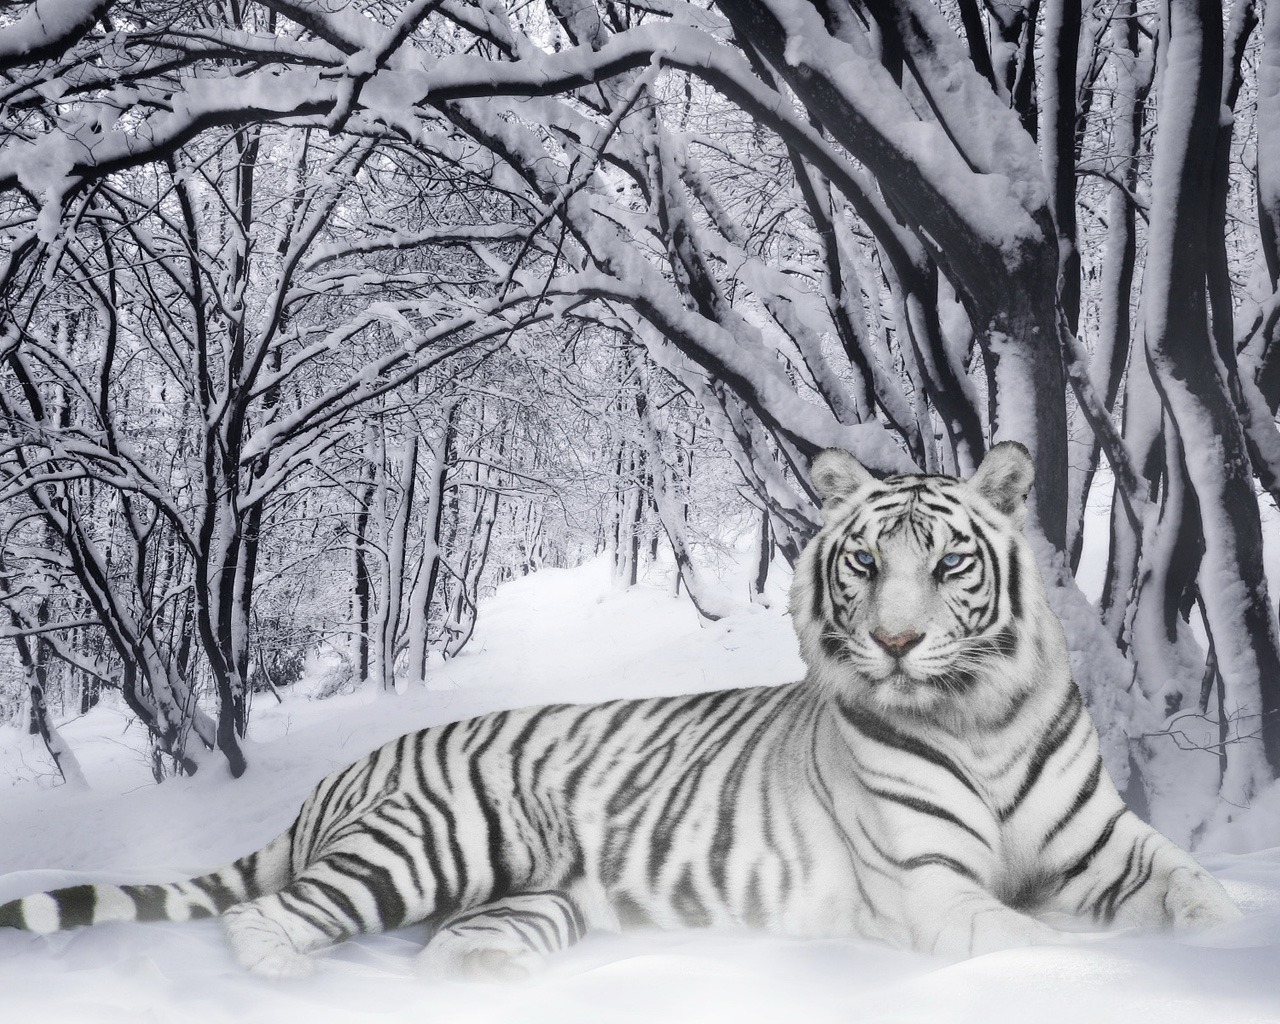 White Tigers With Blue Eyes In Snow - HD Wallpaper 